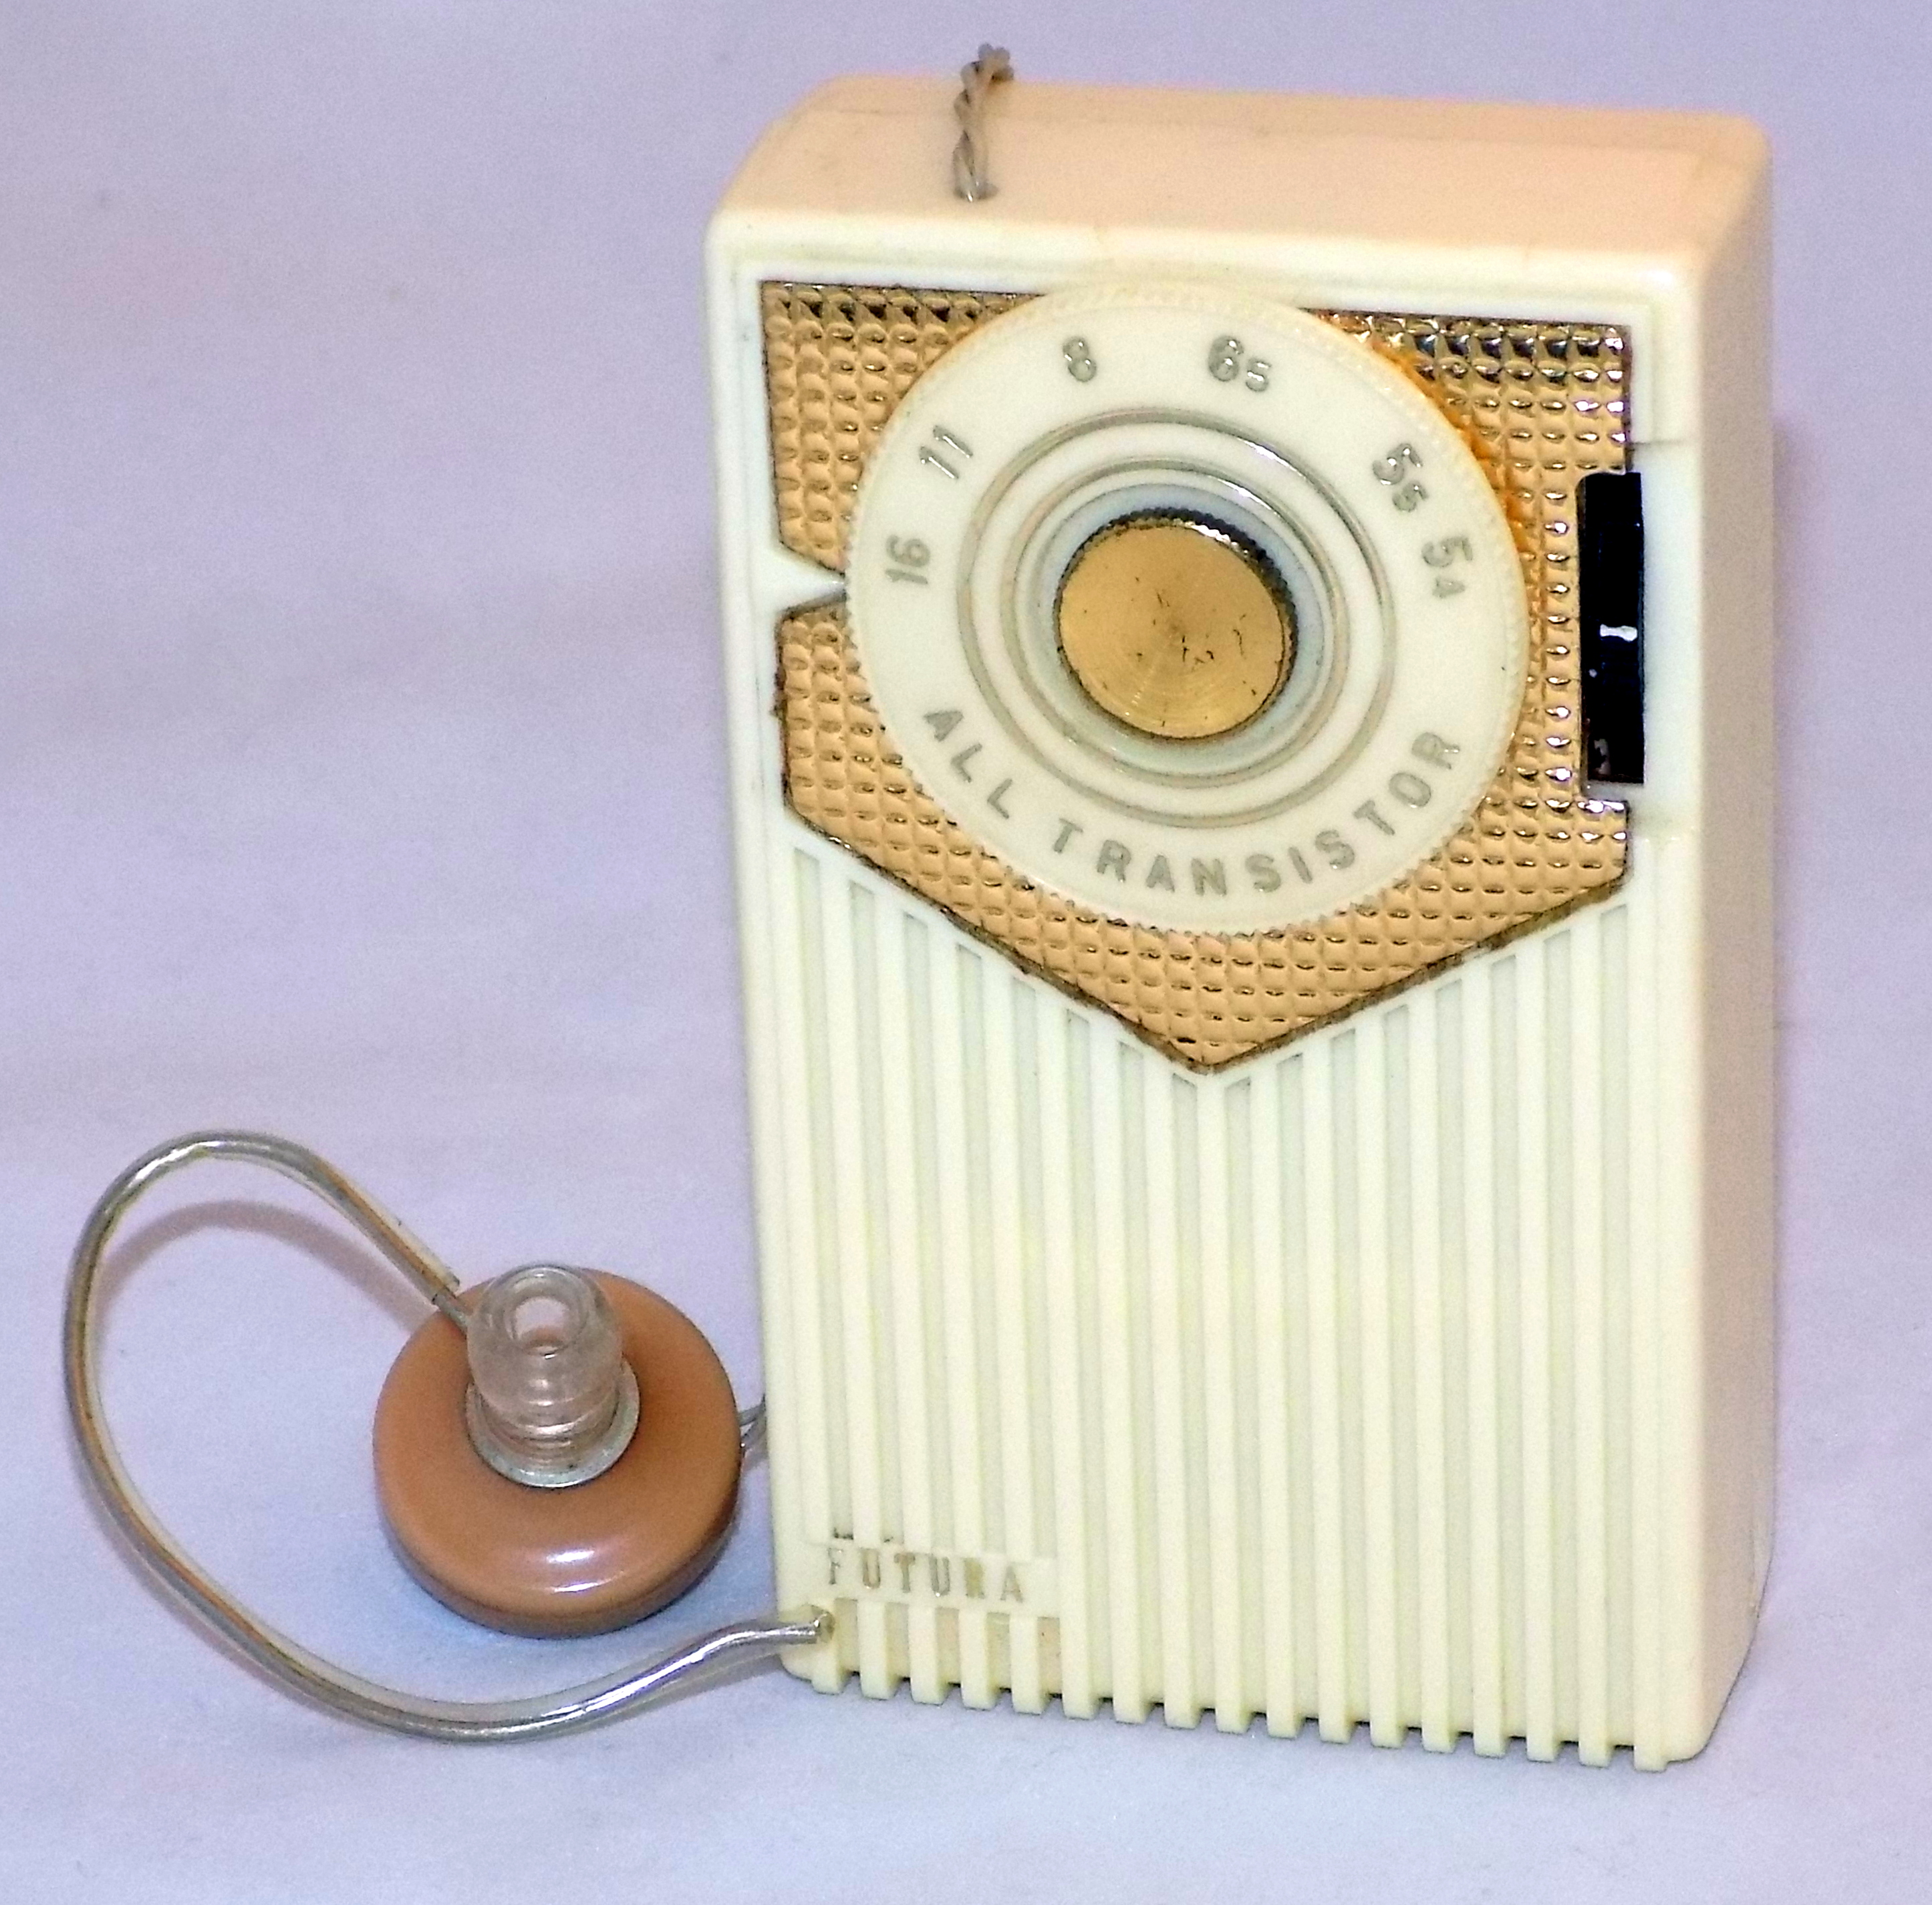 Vintage_Futura_Transistor_Radio_%28No_Model_Number%29%2C_By_Bell_Products%2C_St._Louis%2C_Mo.%2C_Made_in_the_USA%2C_Earphone_Listening_Only%2C_Circa_1959_%2823616632435%29.jpg